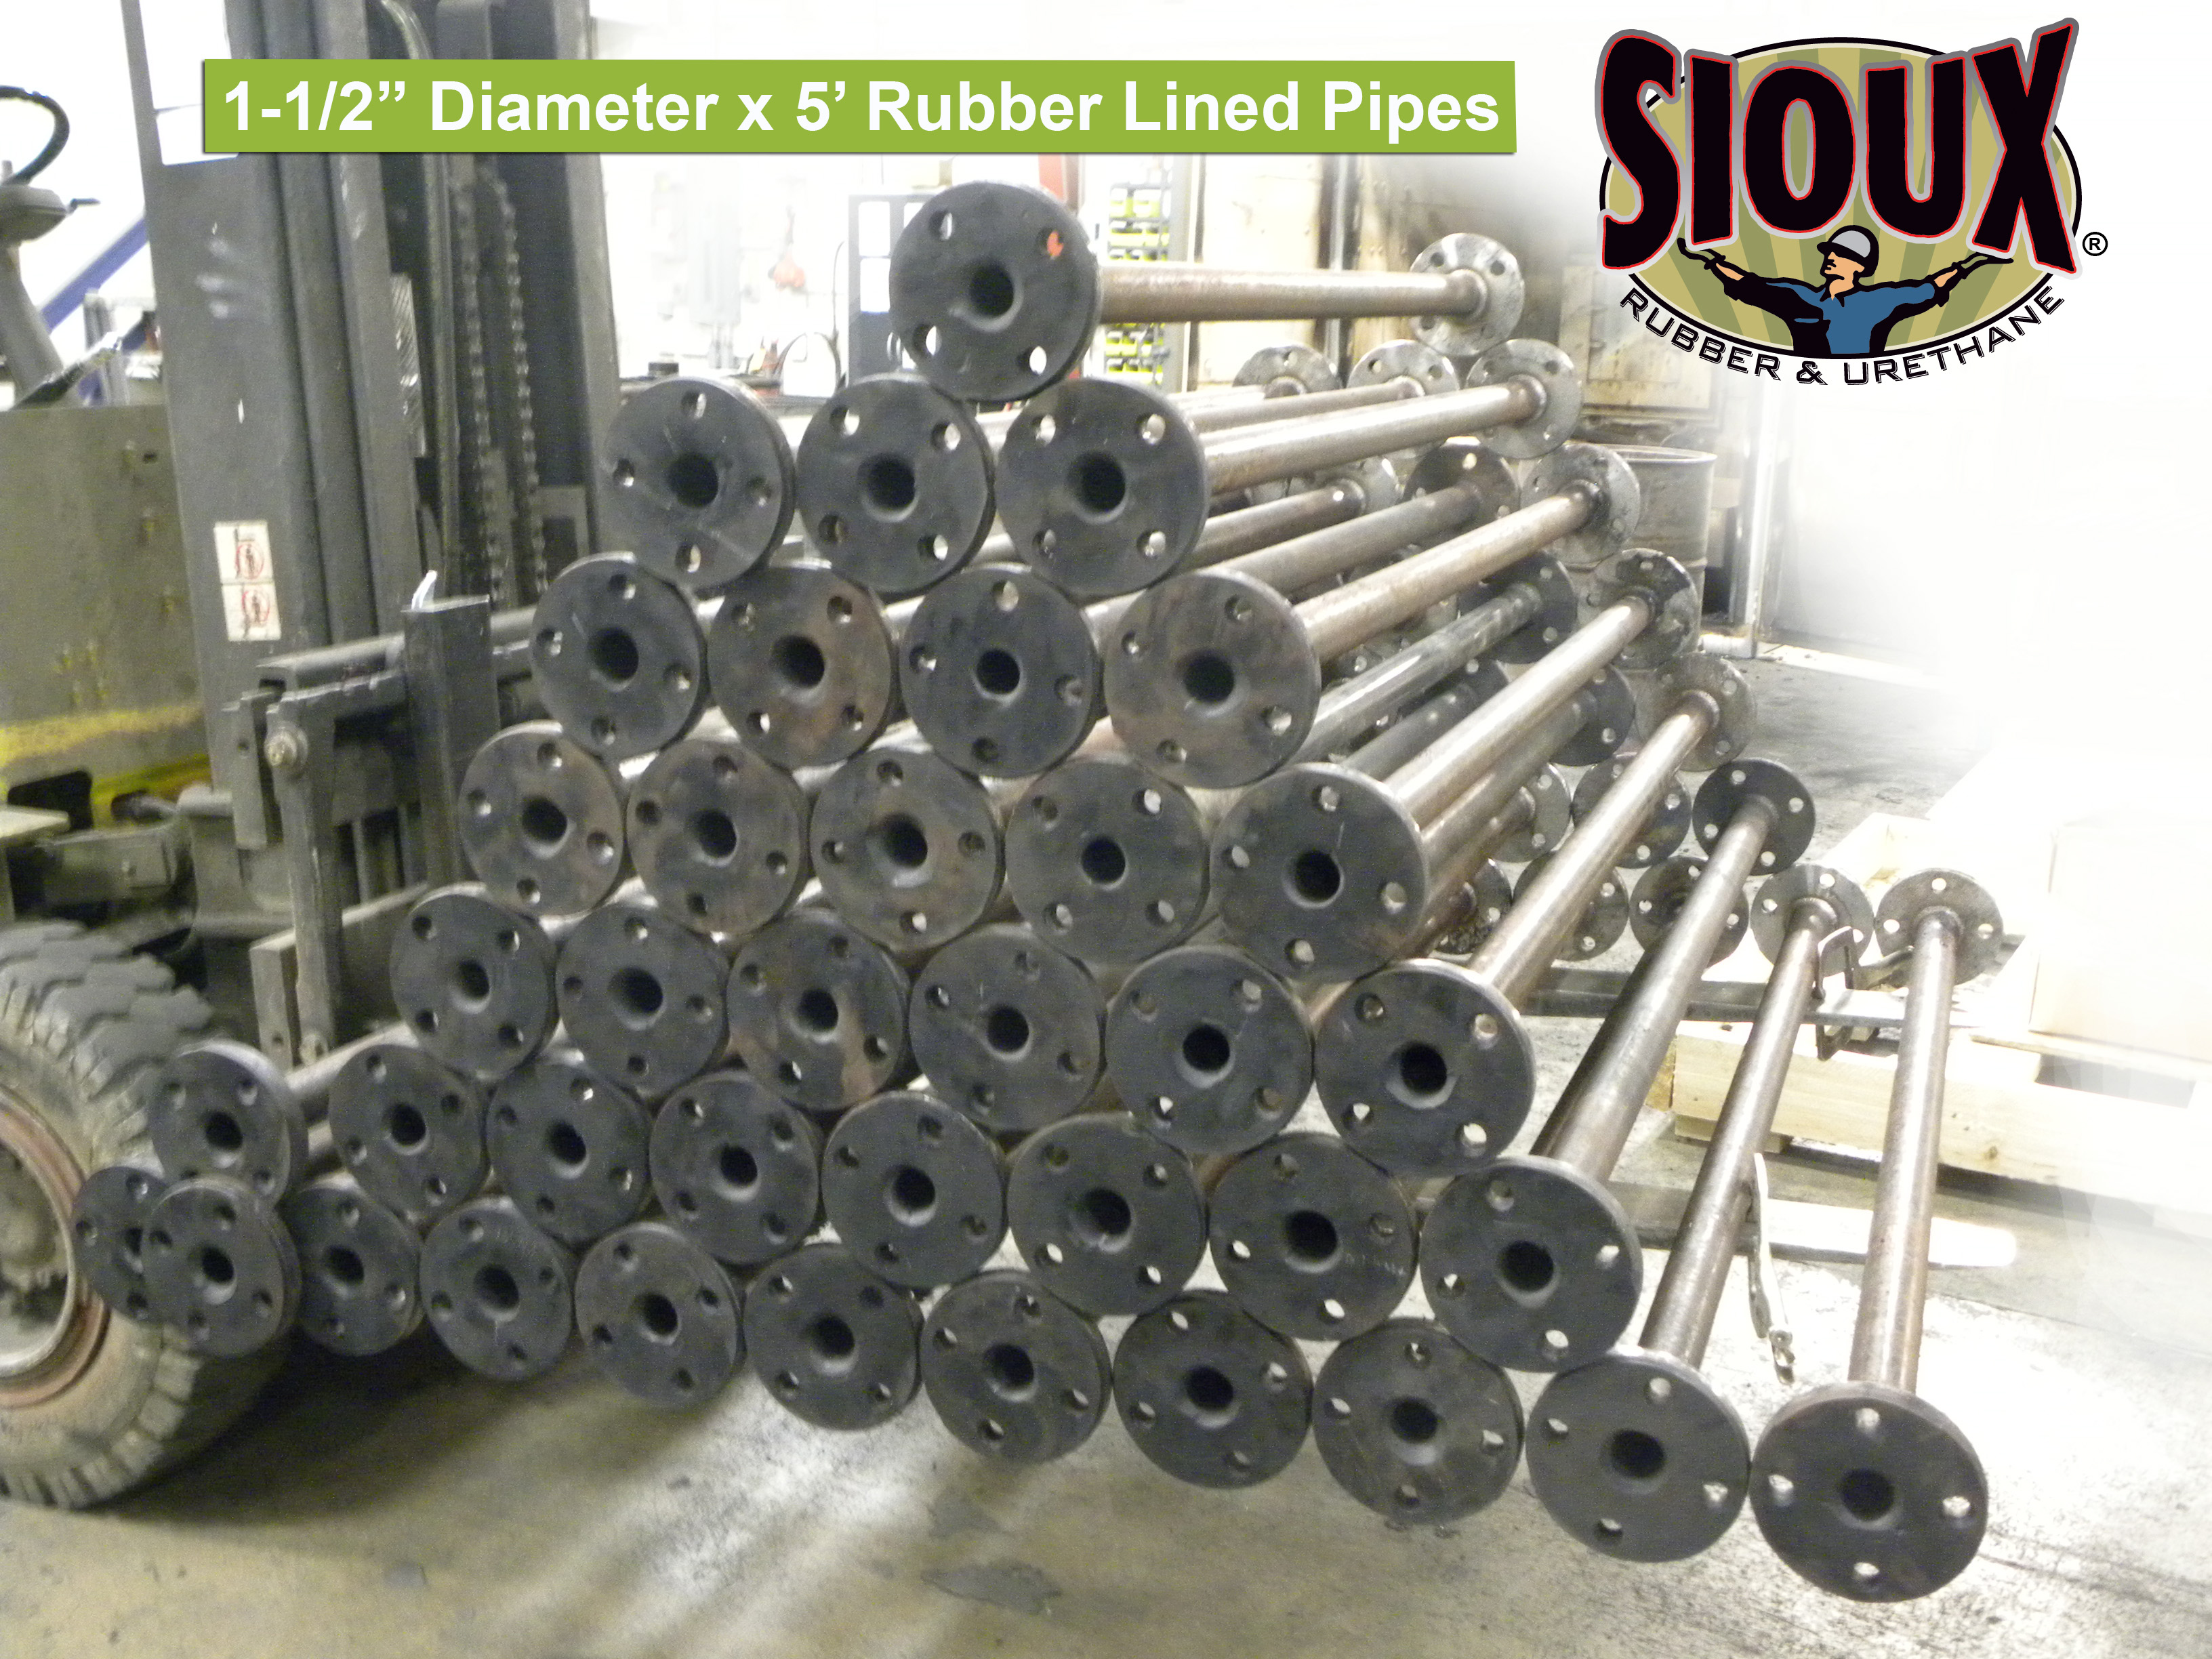 1-1/2” diameter Pipe-Yup, we can rubber line that!